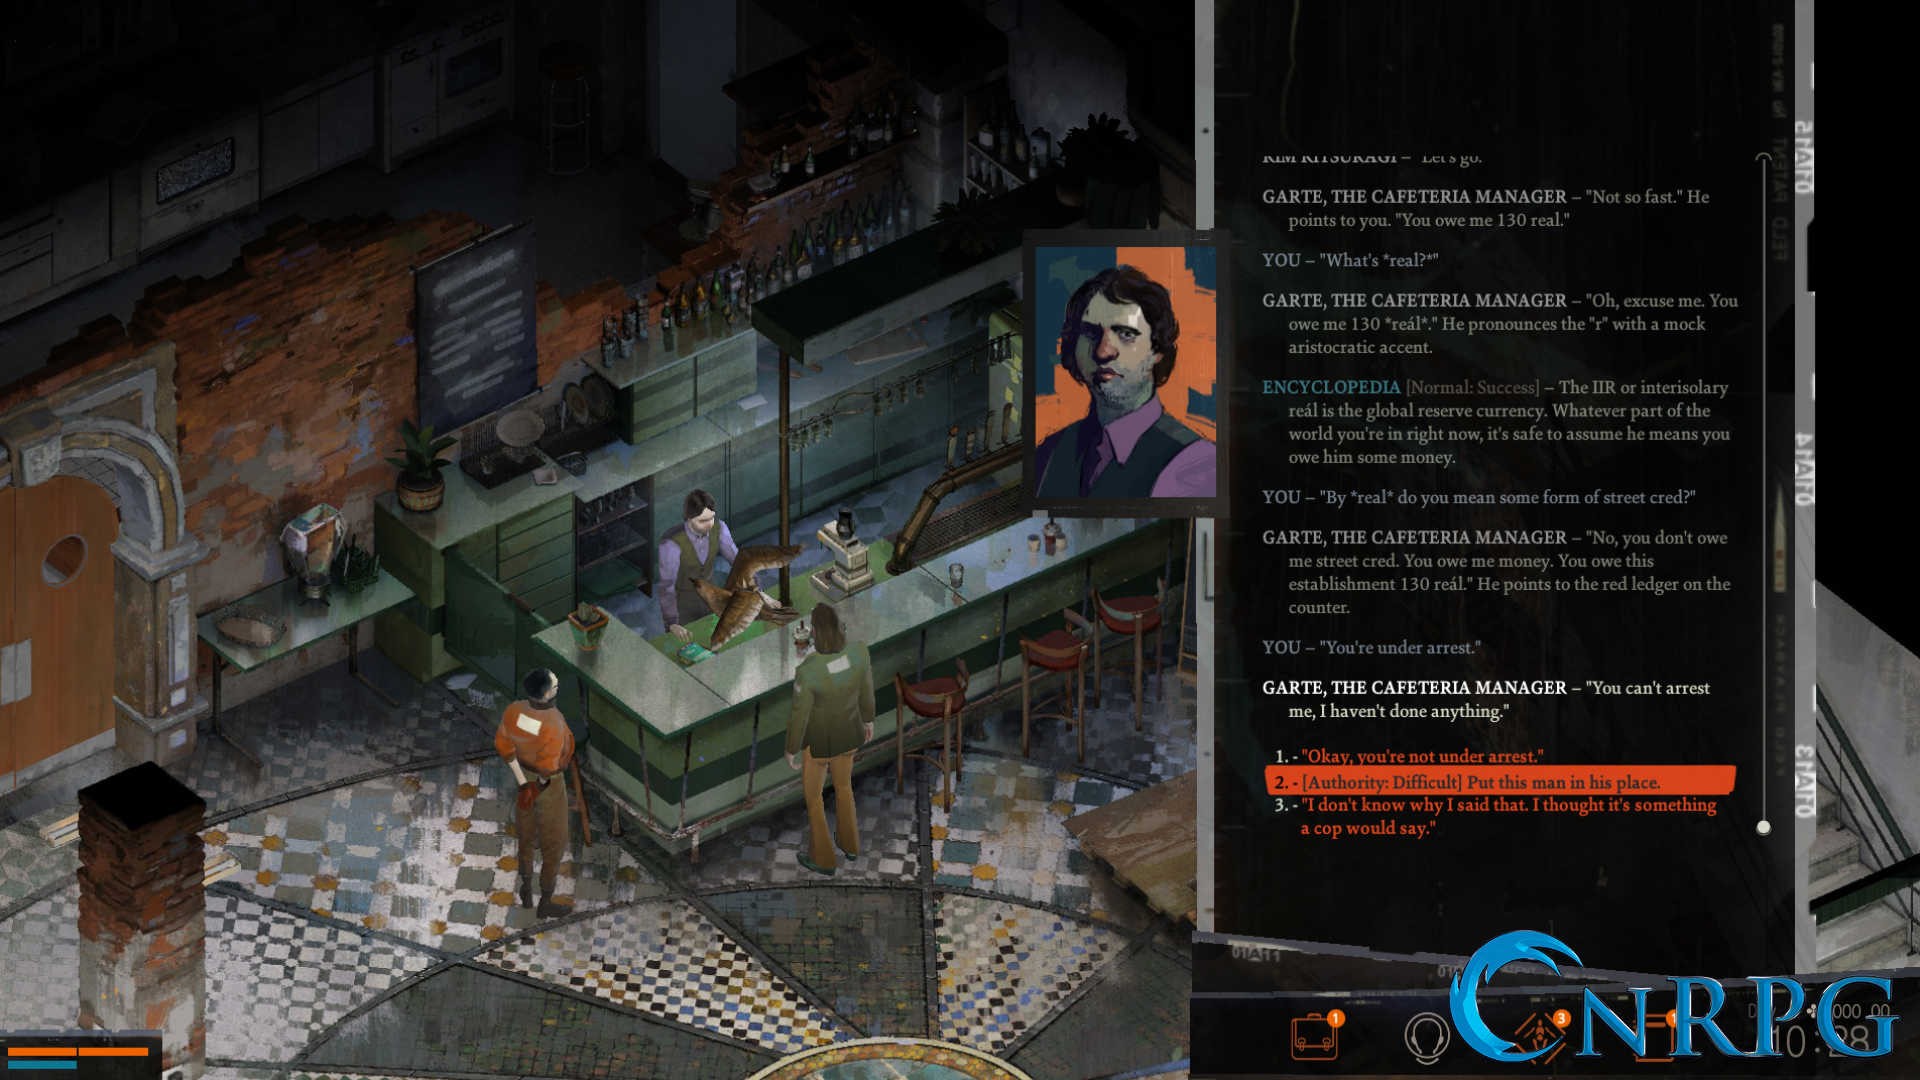 The protagonist of Disco Elysium is hassled by a surly bartender in a screenshot taken from the game.